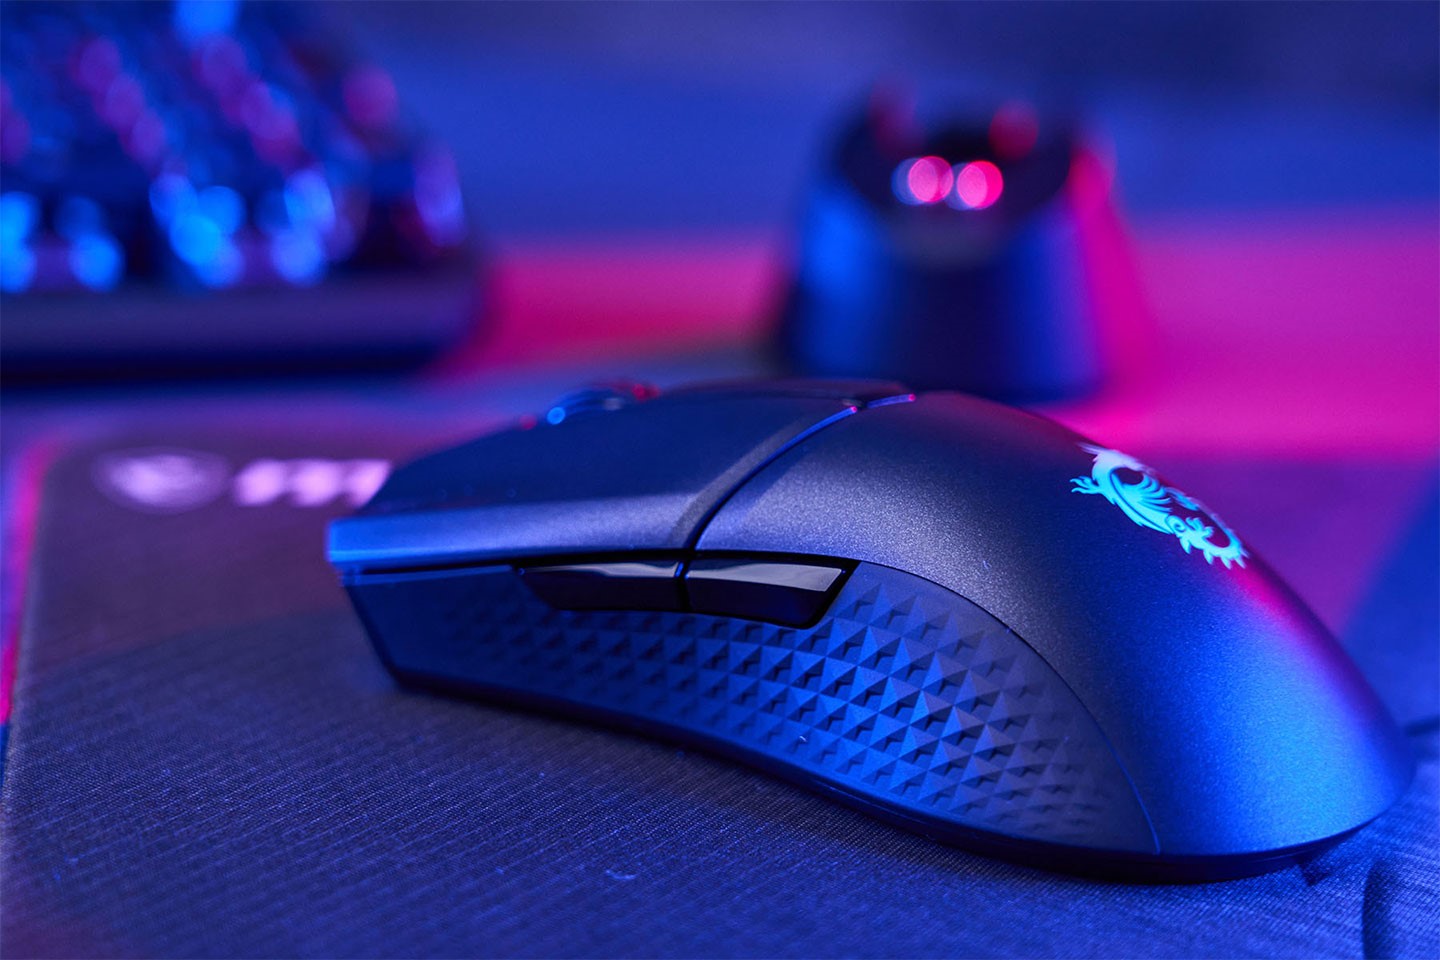 The diamond pattern block is planned on the left side of the mouse body, which can make the grip feel more stable, and two sets of function keys are configured at the same time.